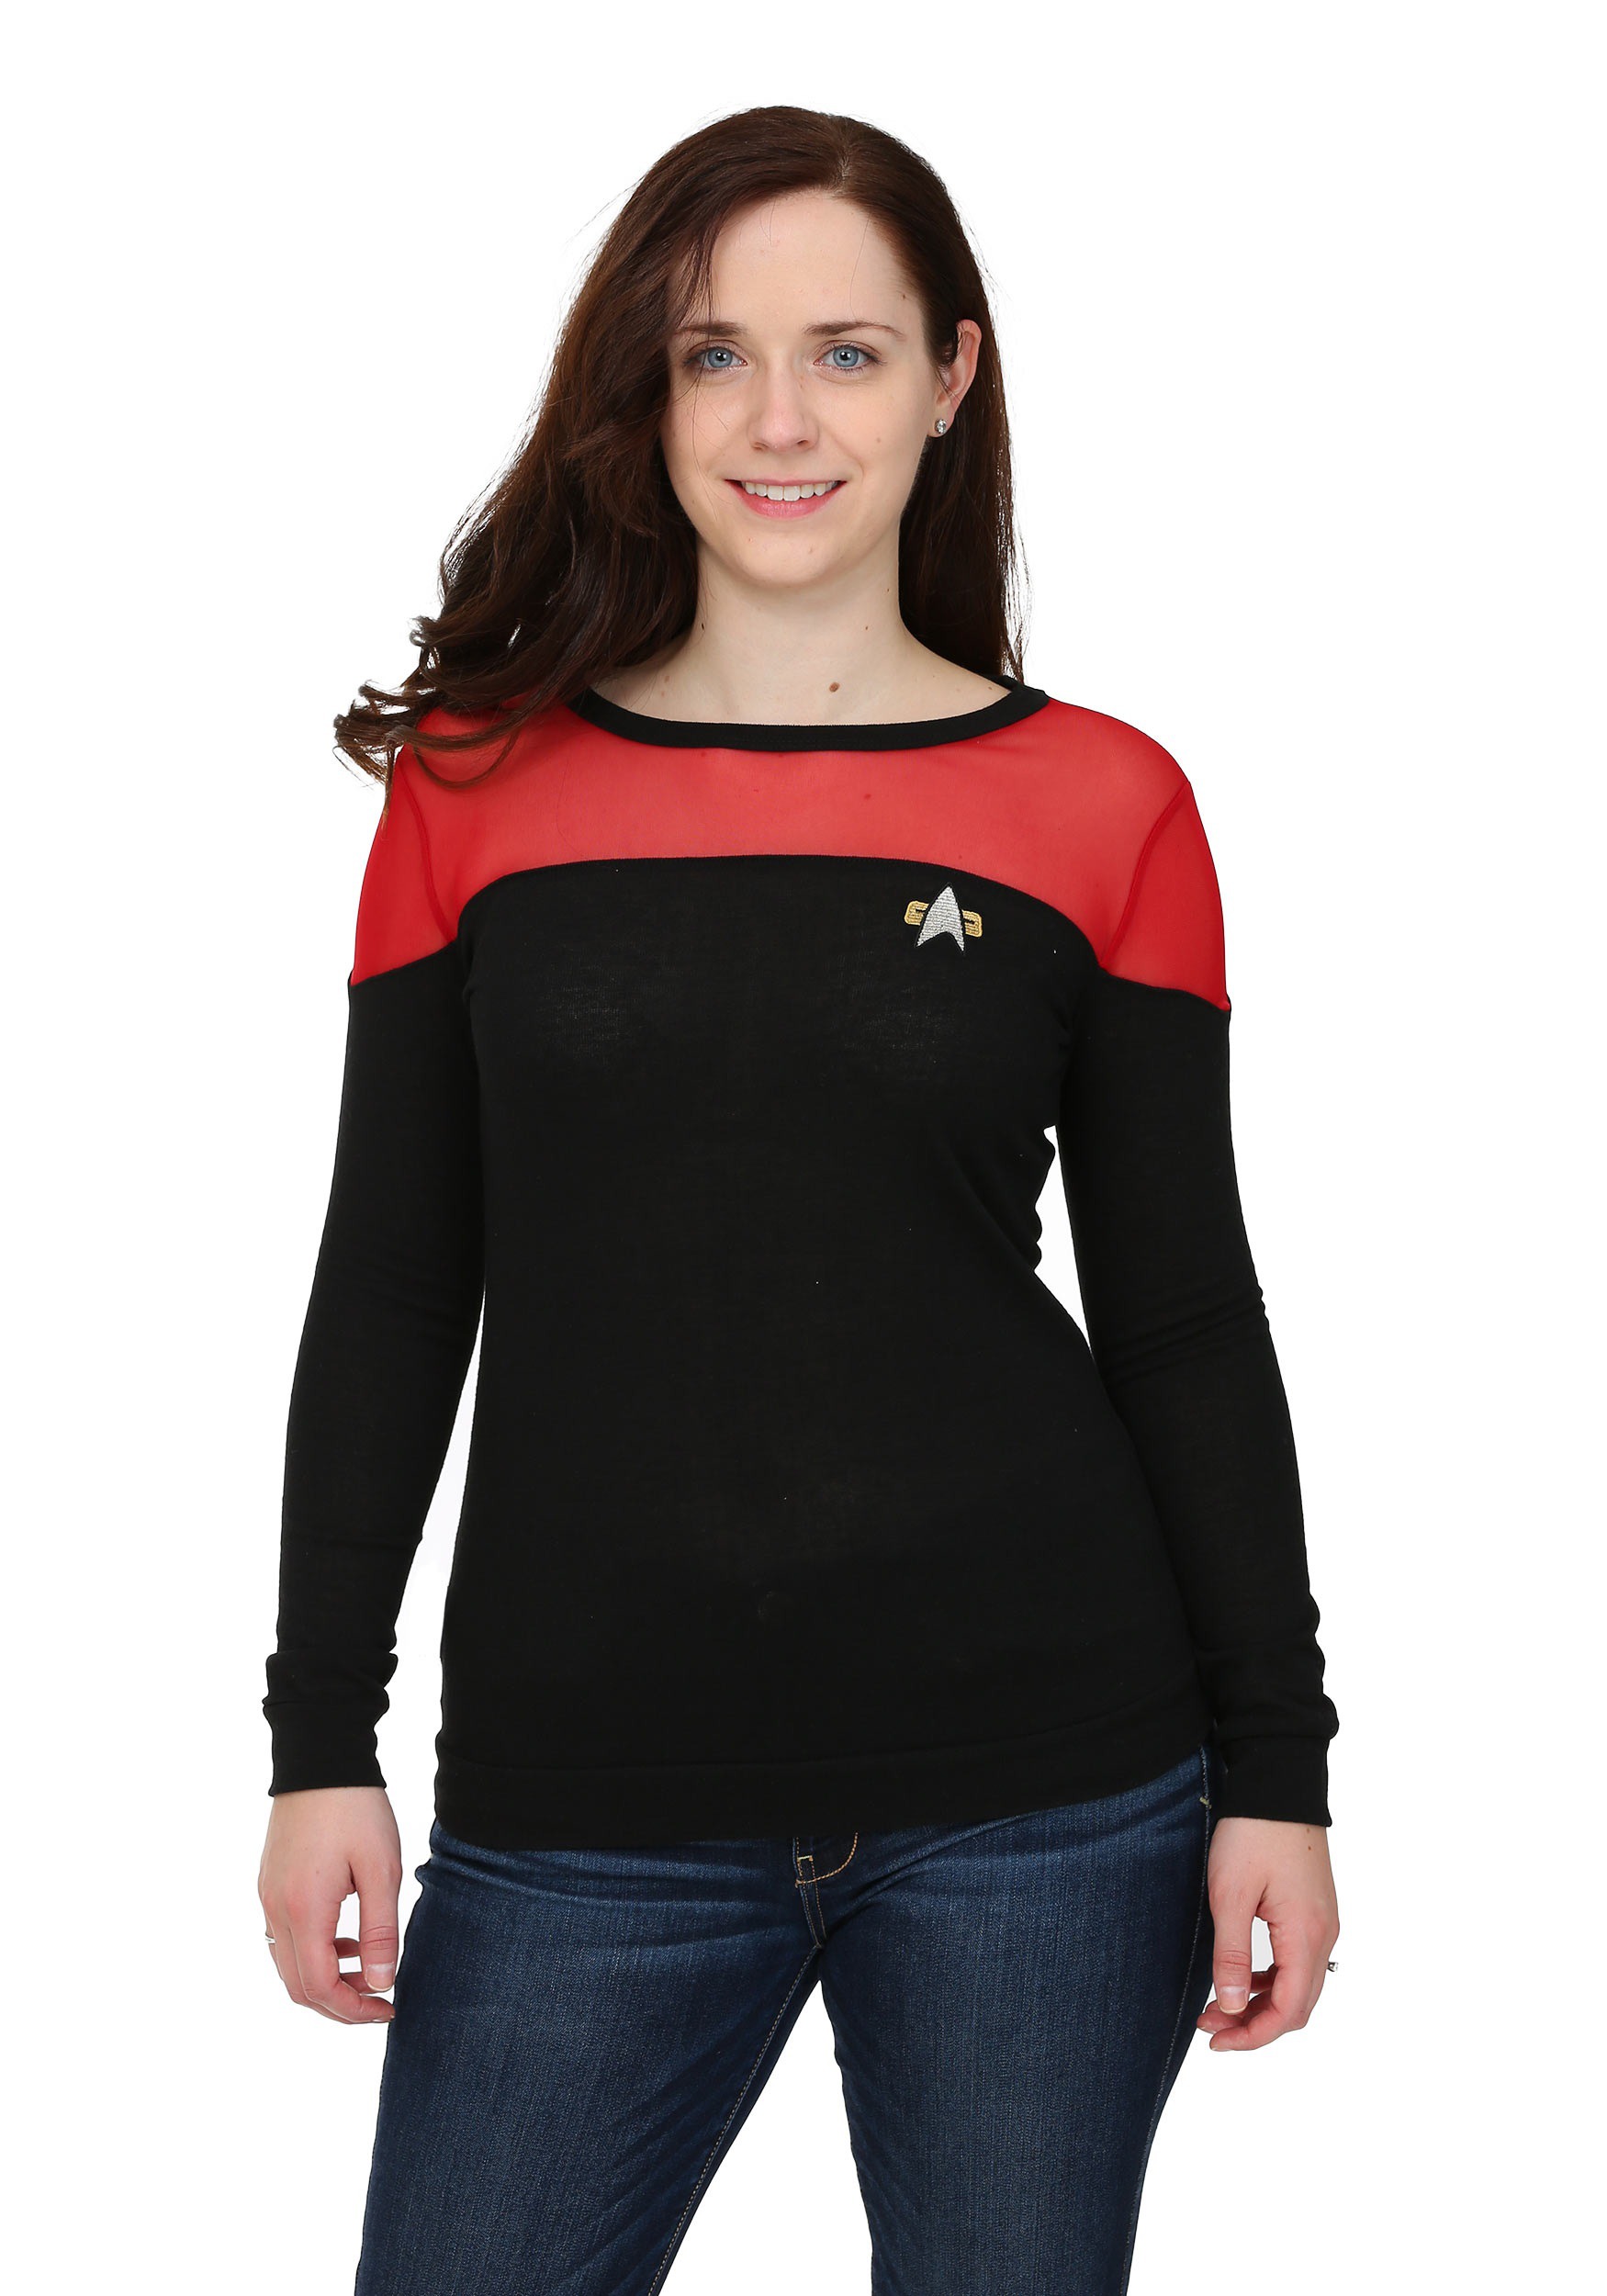 star trek sweater outfit